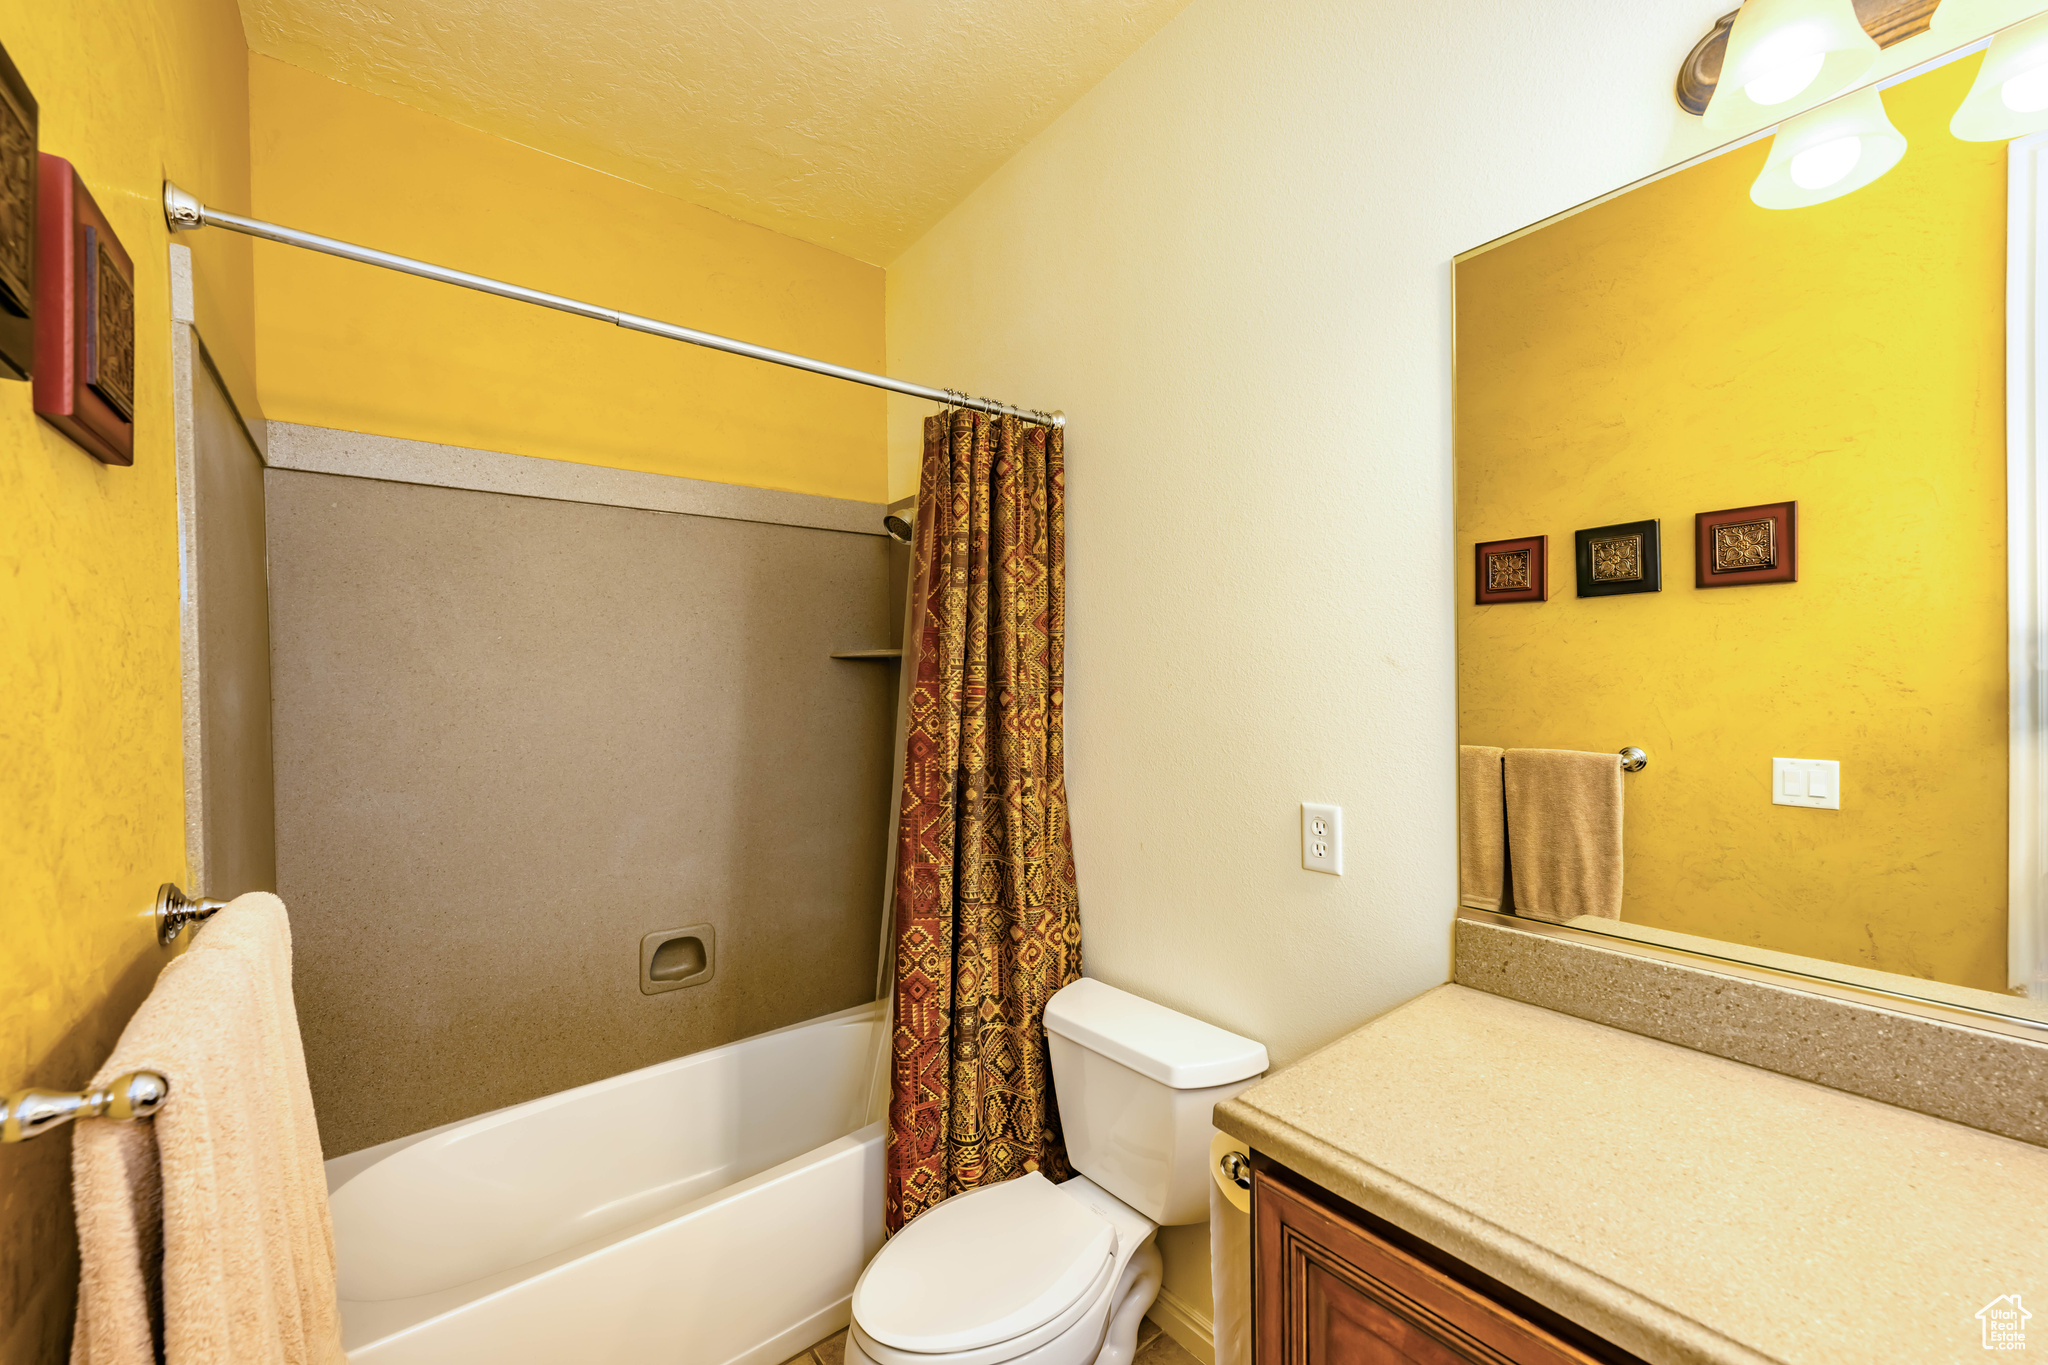 Full second bathroom featuring shower / bathtub combination with curtain, toilet, vanity, and a textured ceiling